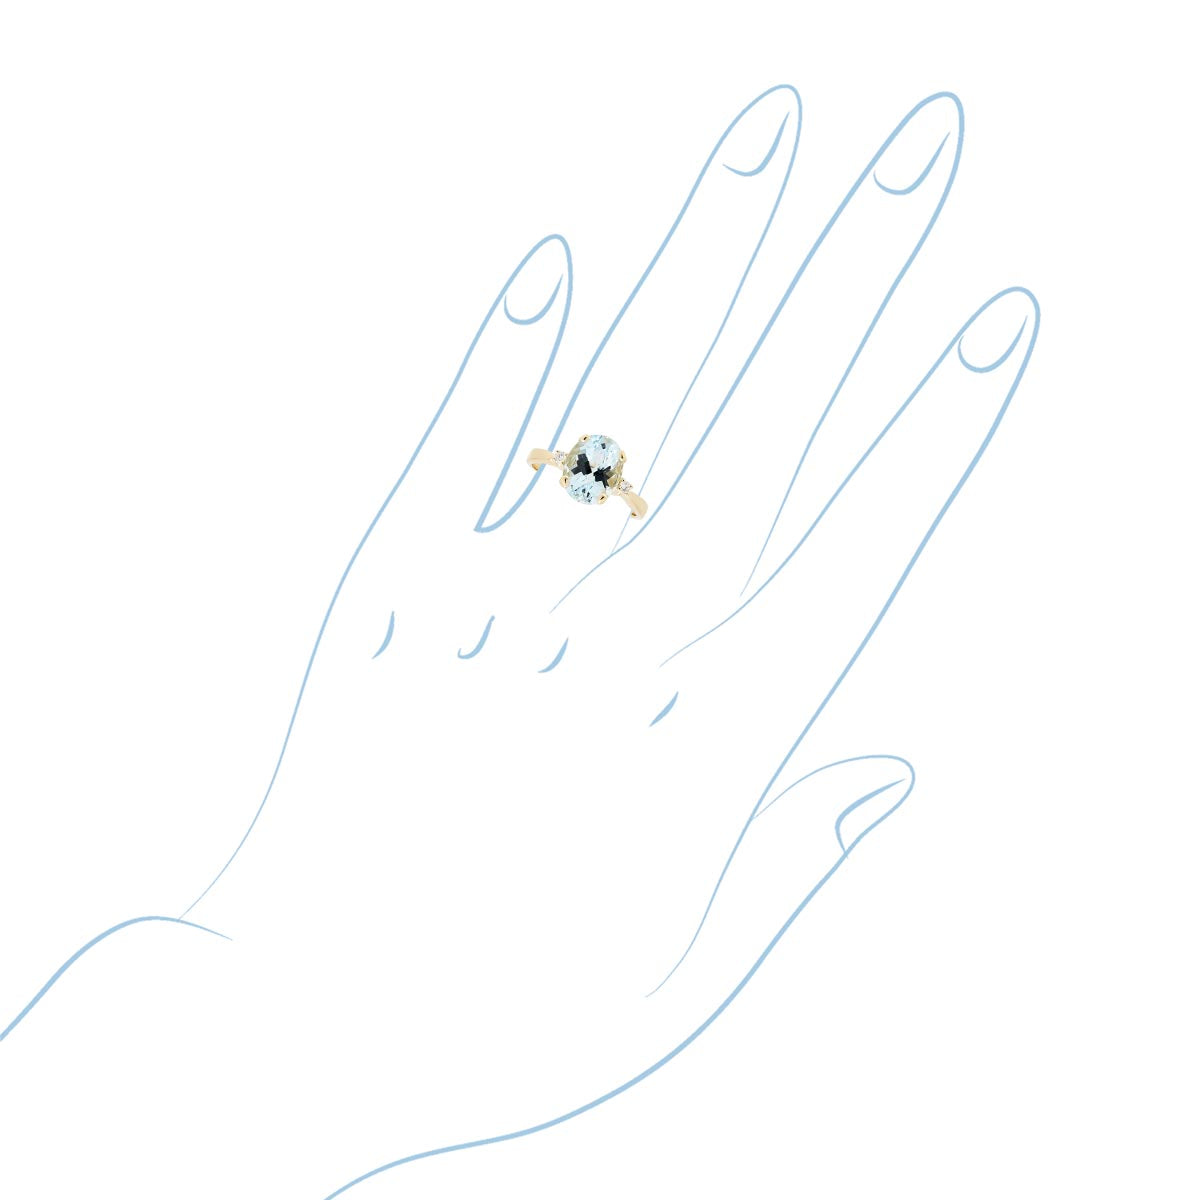 Oval Aquamarine Ring in 14kt Yellow Gold with Diamonds (1/20ct tw)